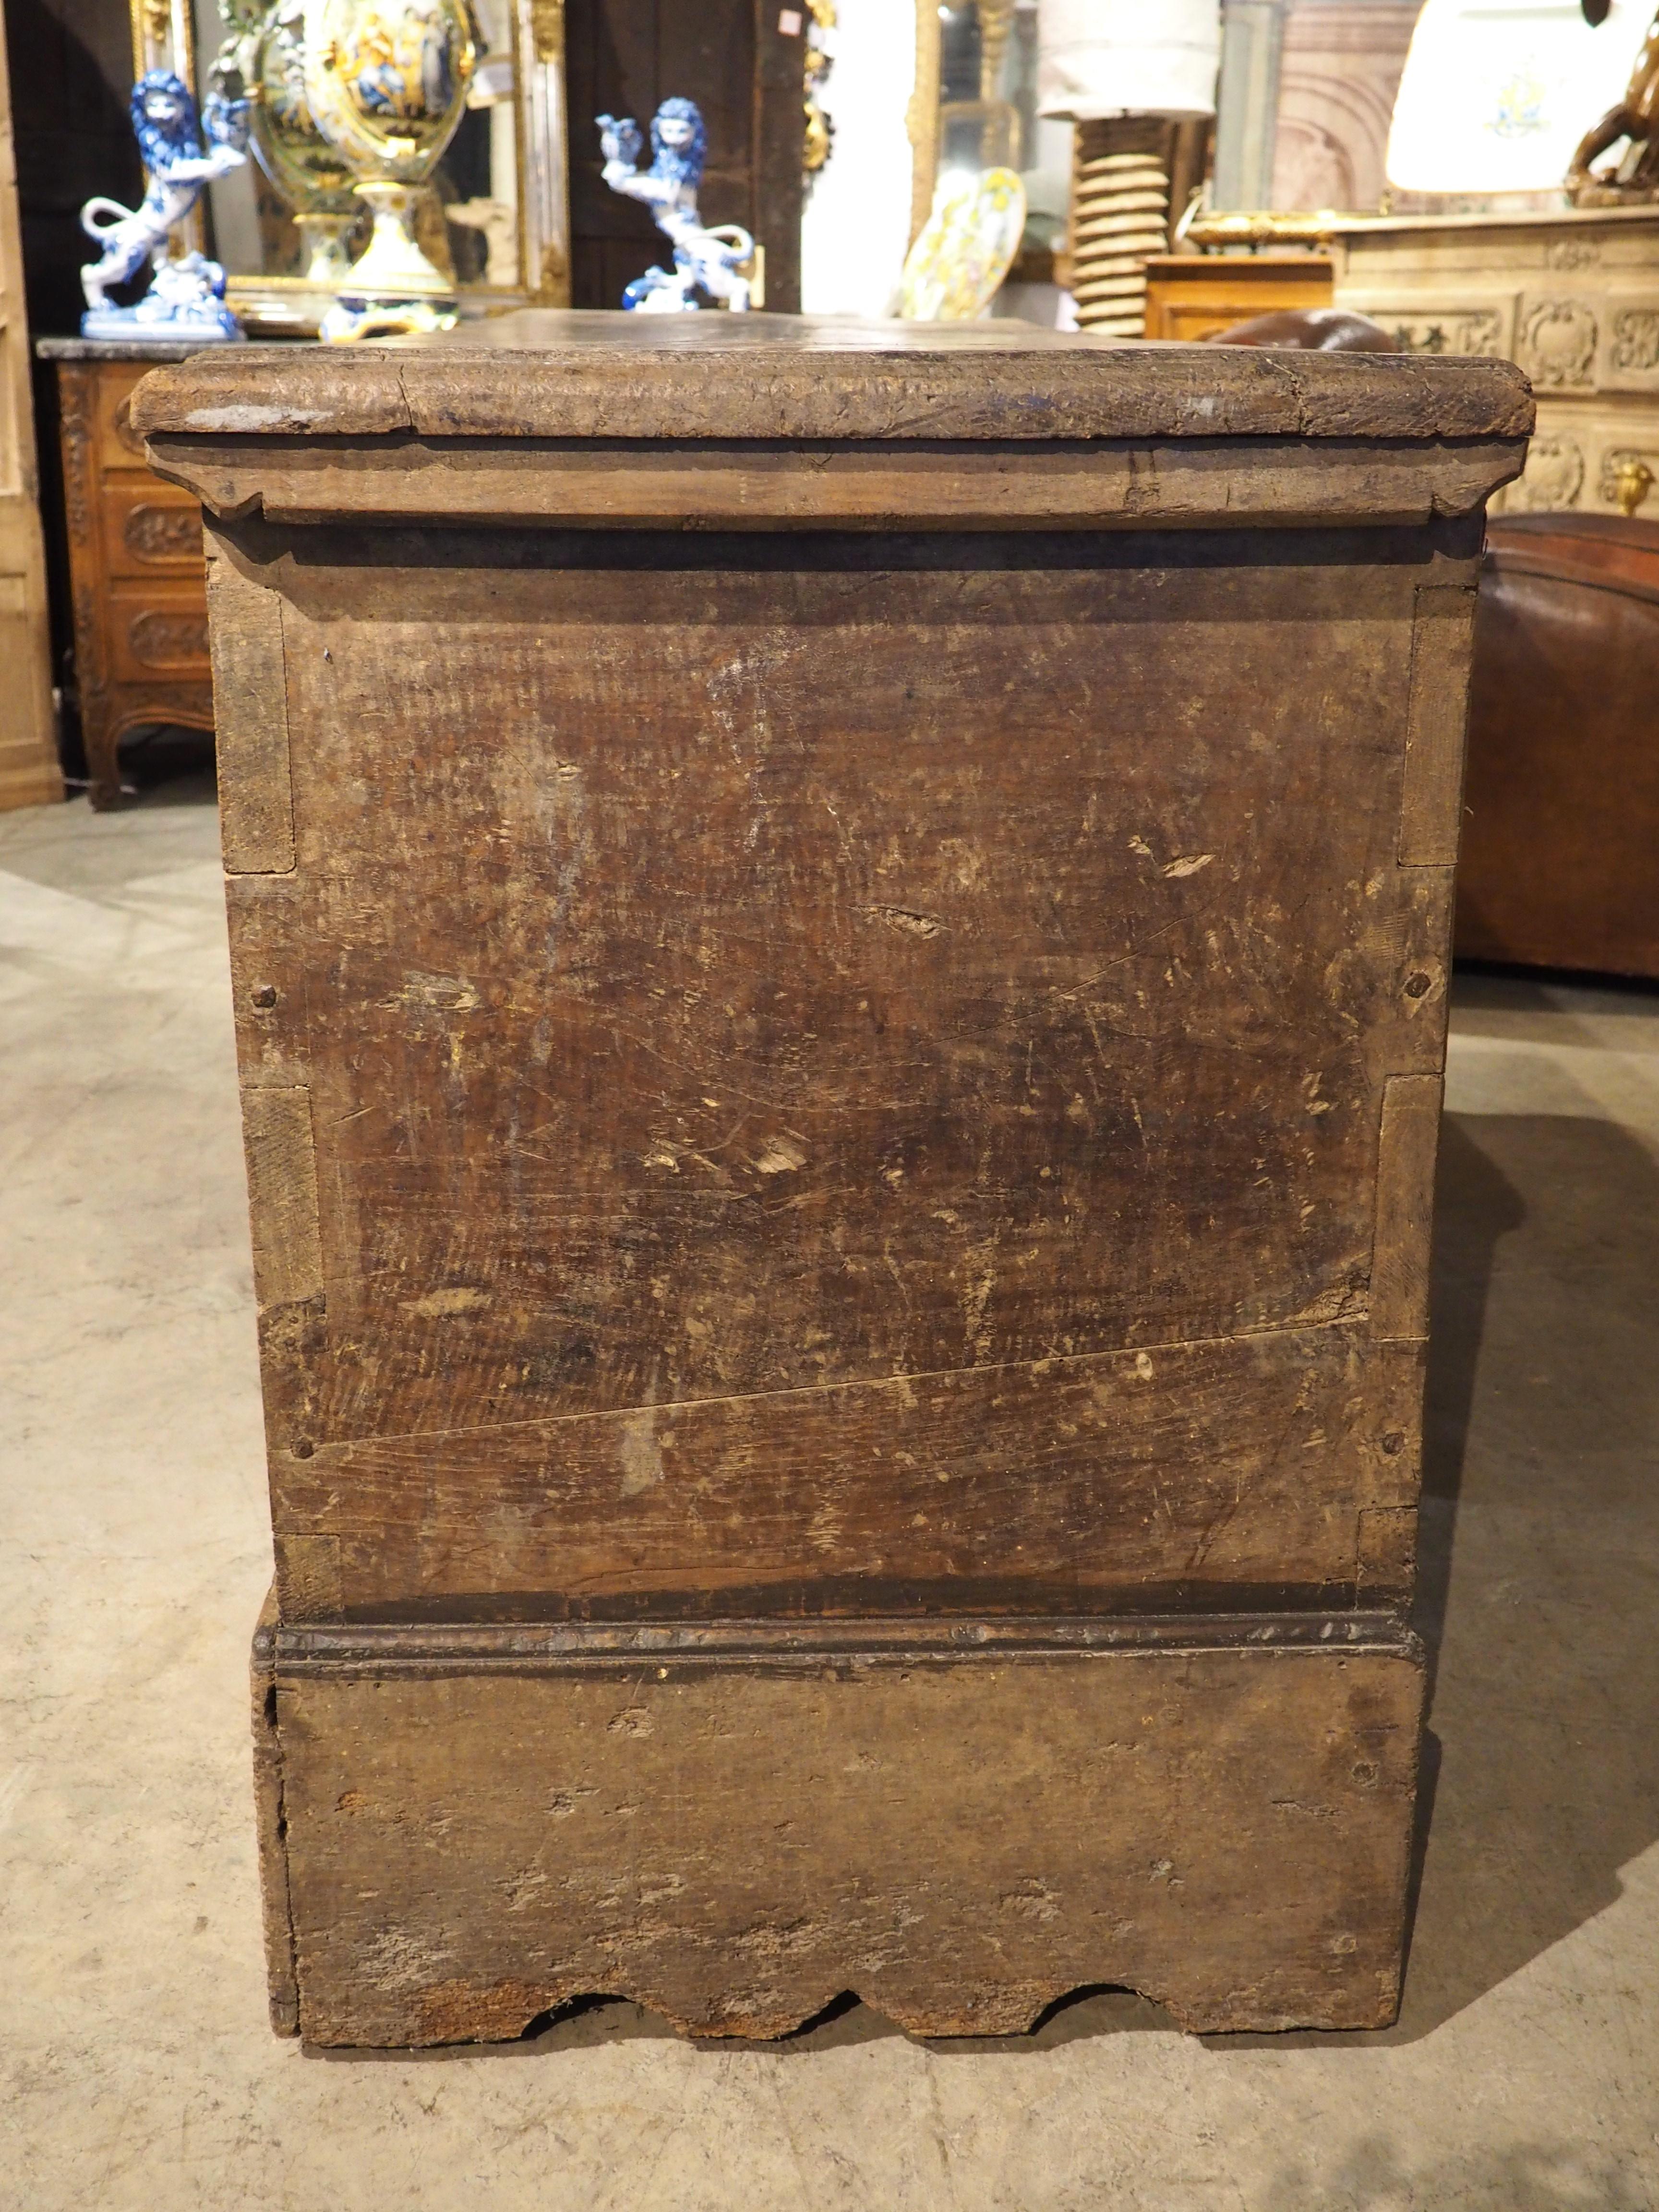 Renaissance Huge Antique Carved Oak Chest or Trunk from Spain, Late 1500s to Early 1600s